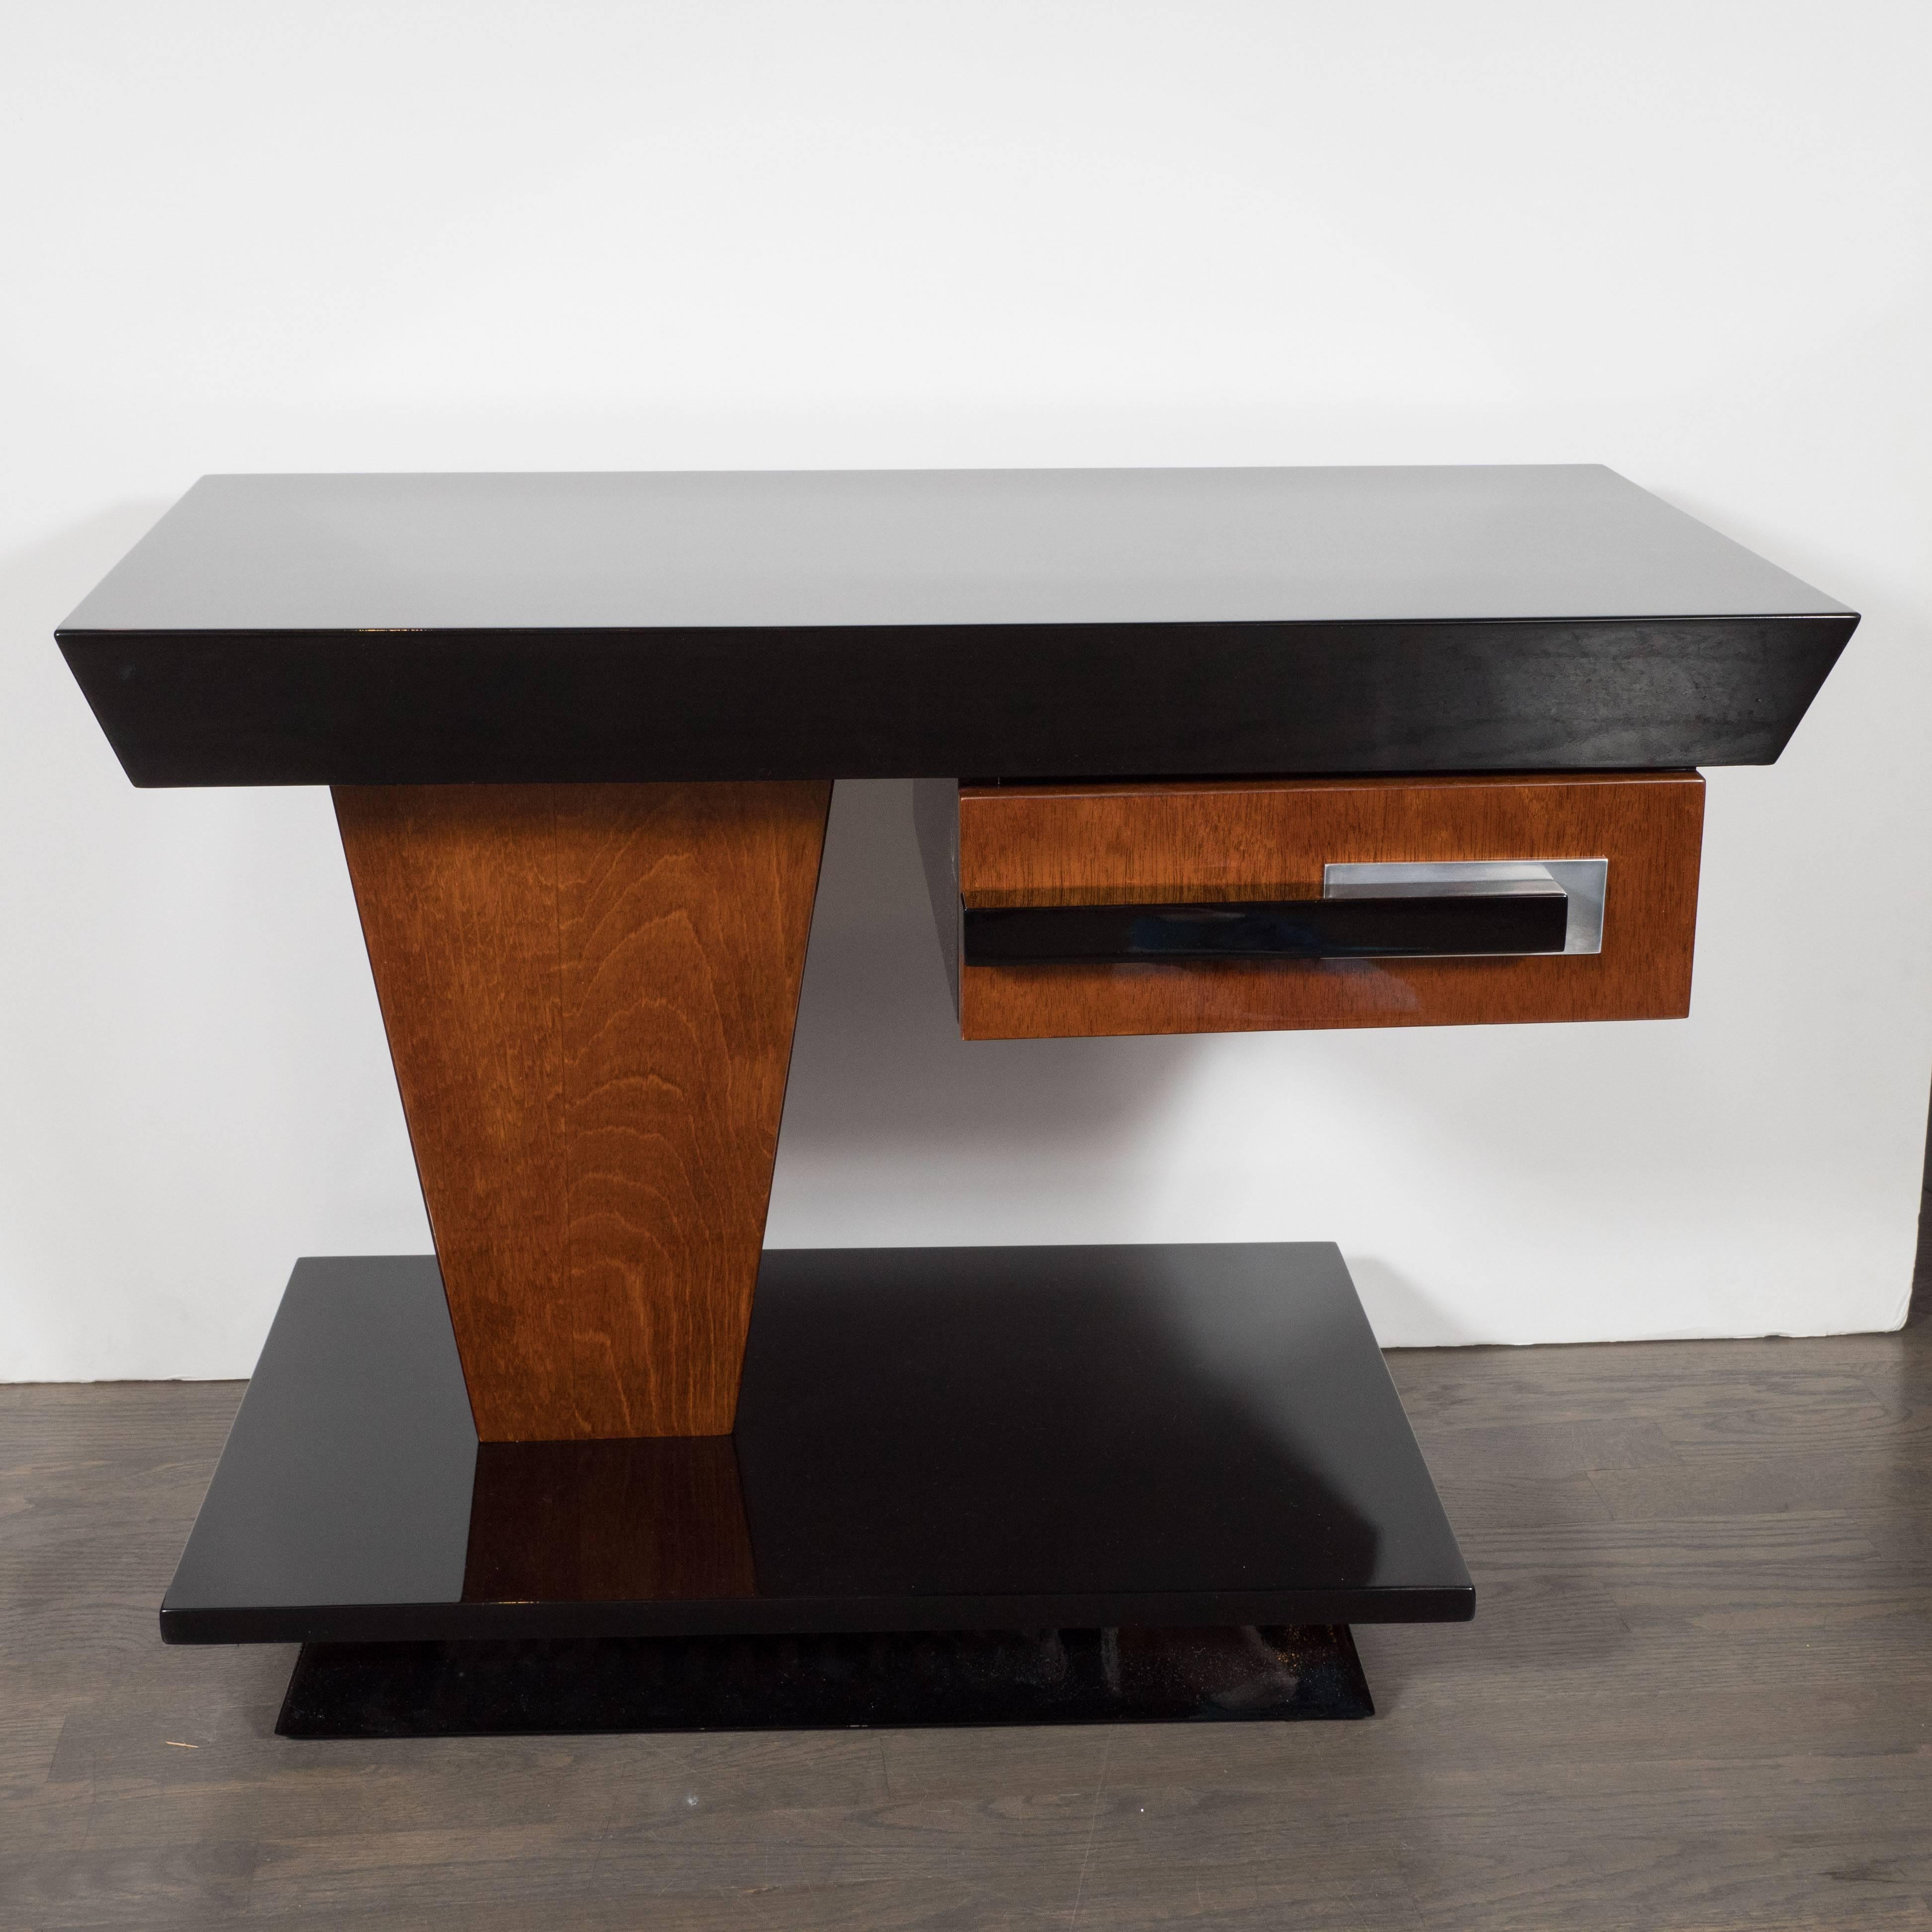 This stunning pair of Machine Age Art Deco end tables were designed in the manner of the legendary Donald Deskey, the legendary visionary behind Radio City Music Hall, circa 1935. They were realized from the finest materials available including